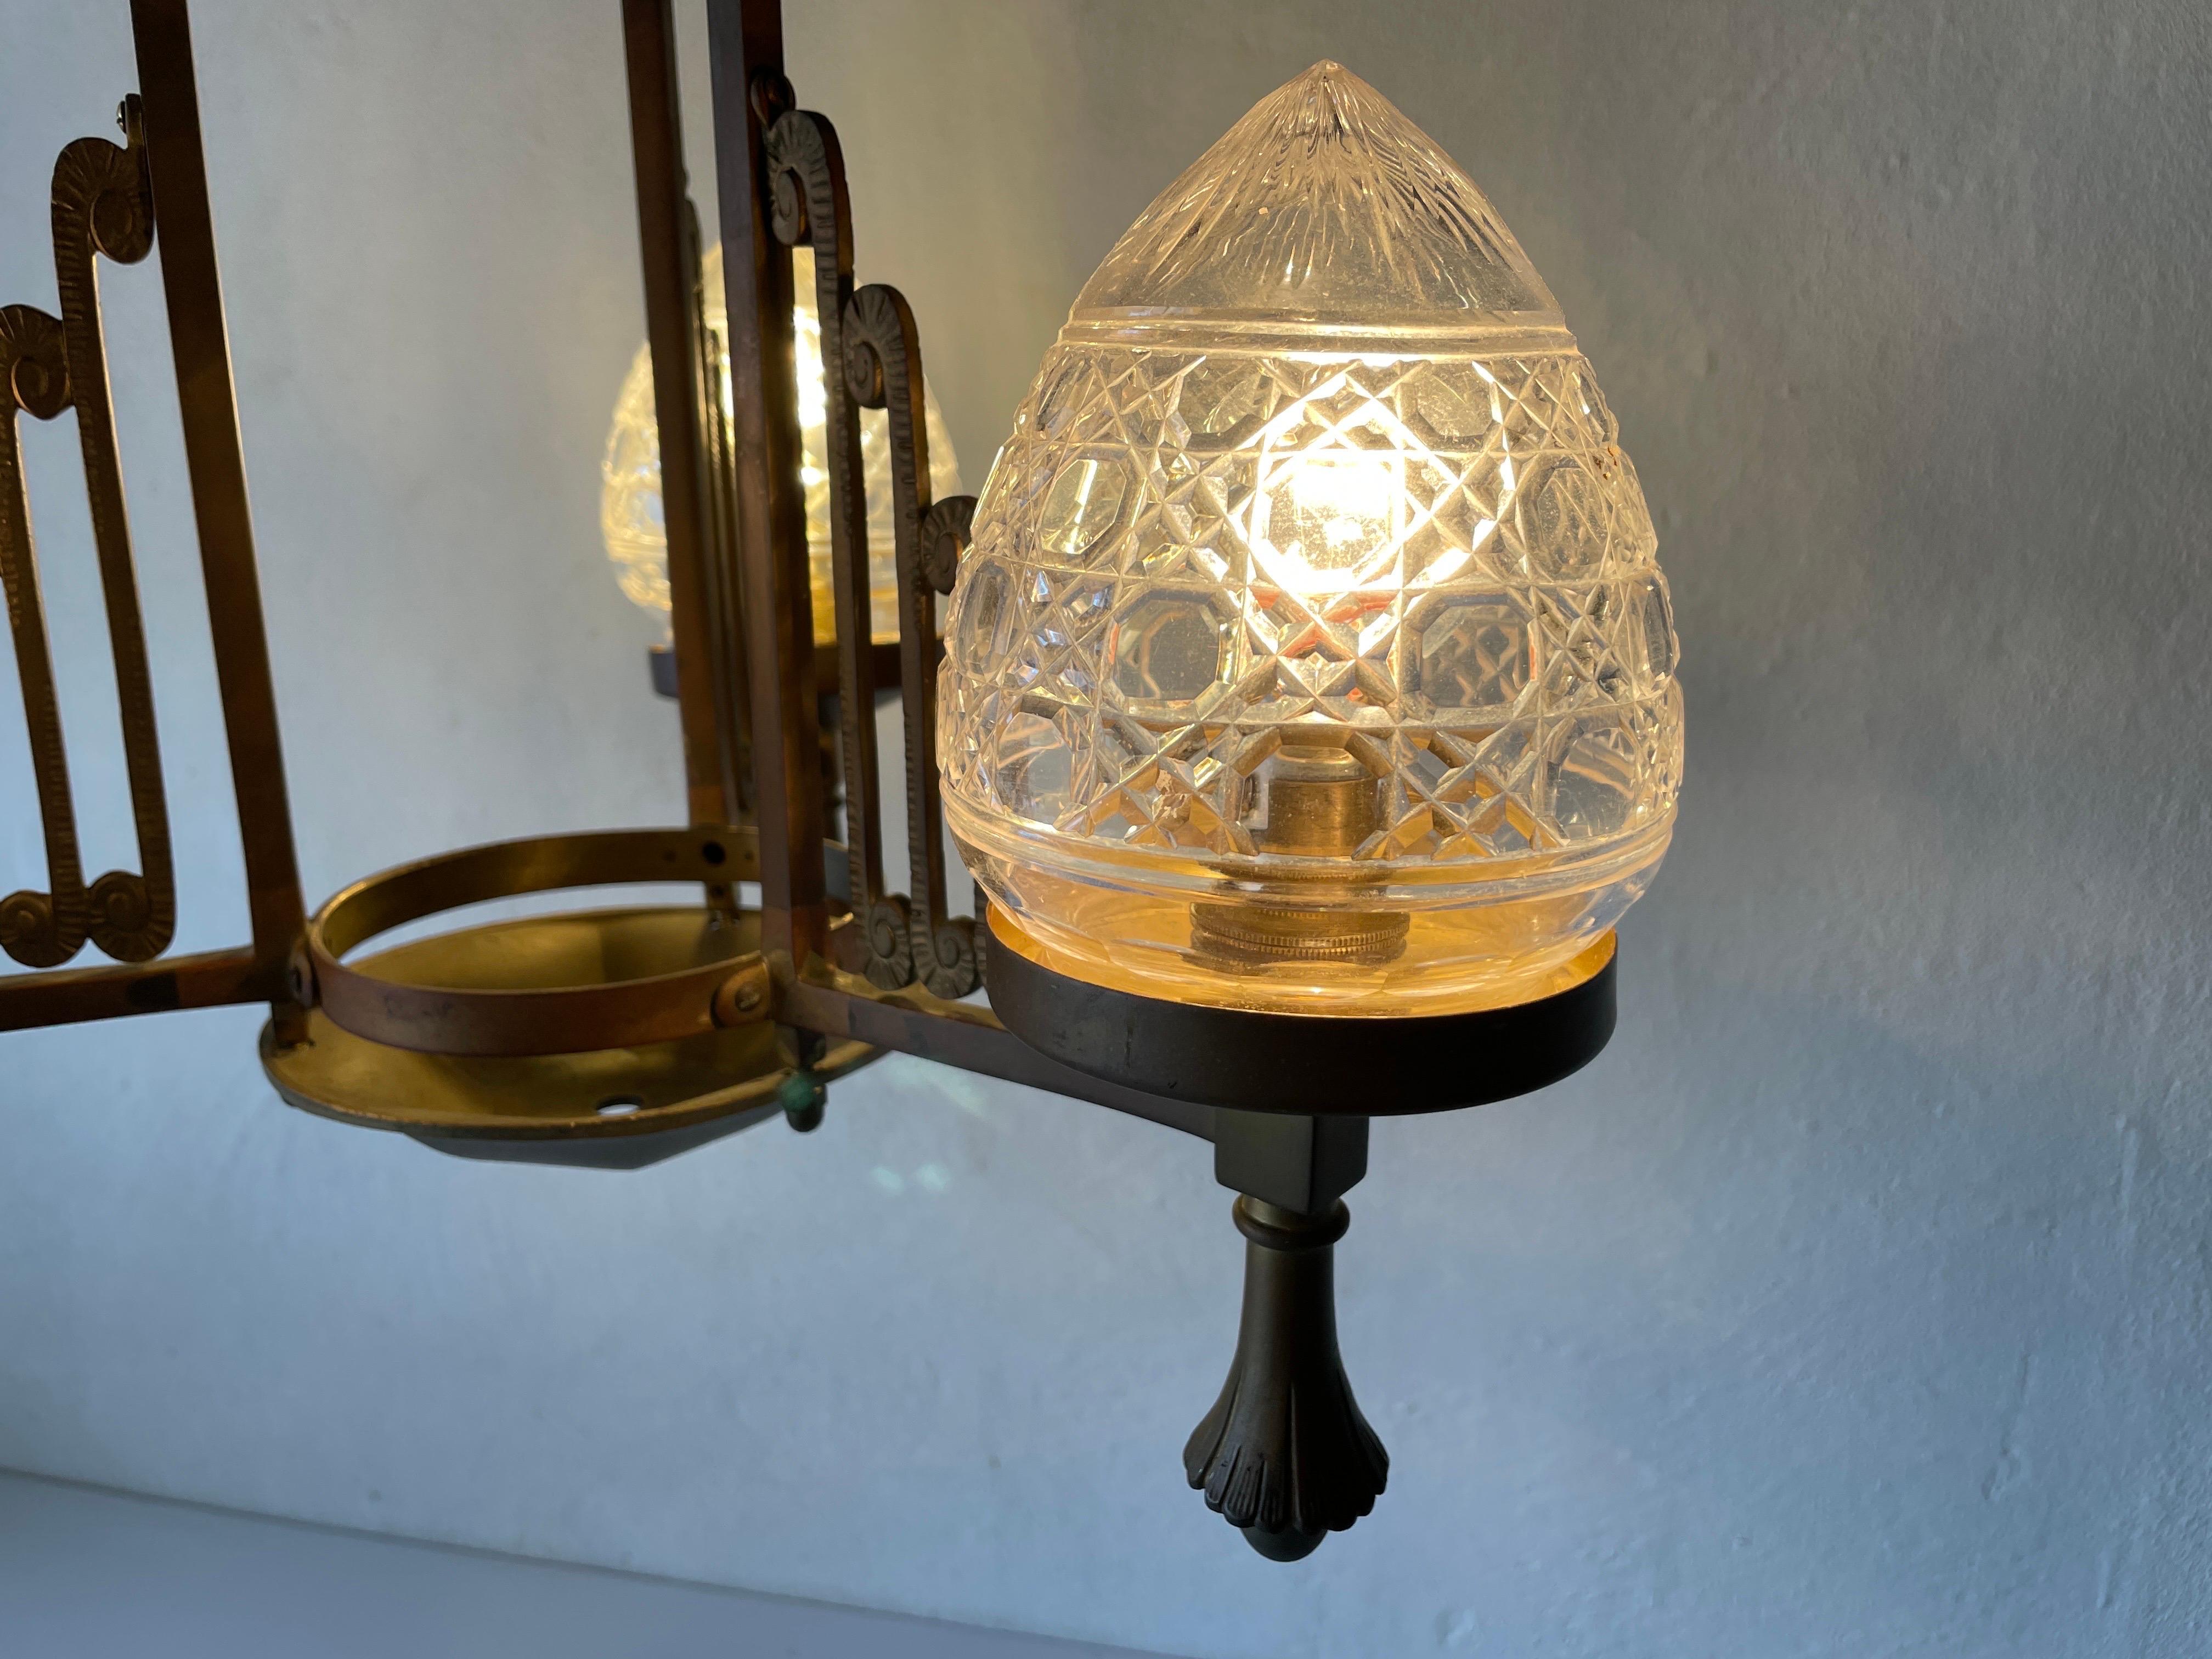 Unique French Copper Architectural Body Chandelier, 1940s, France For Sale 10